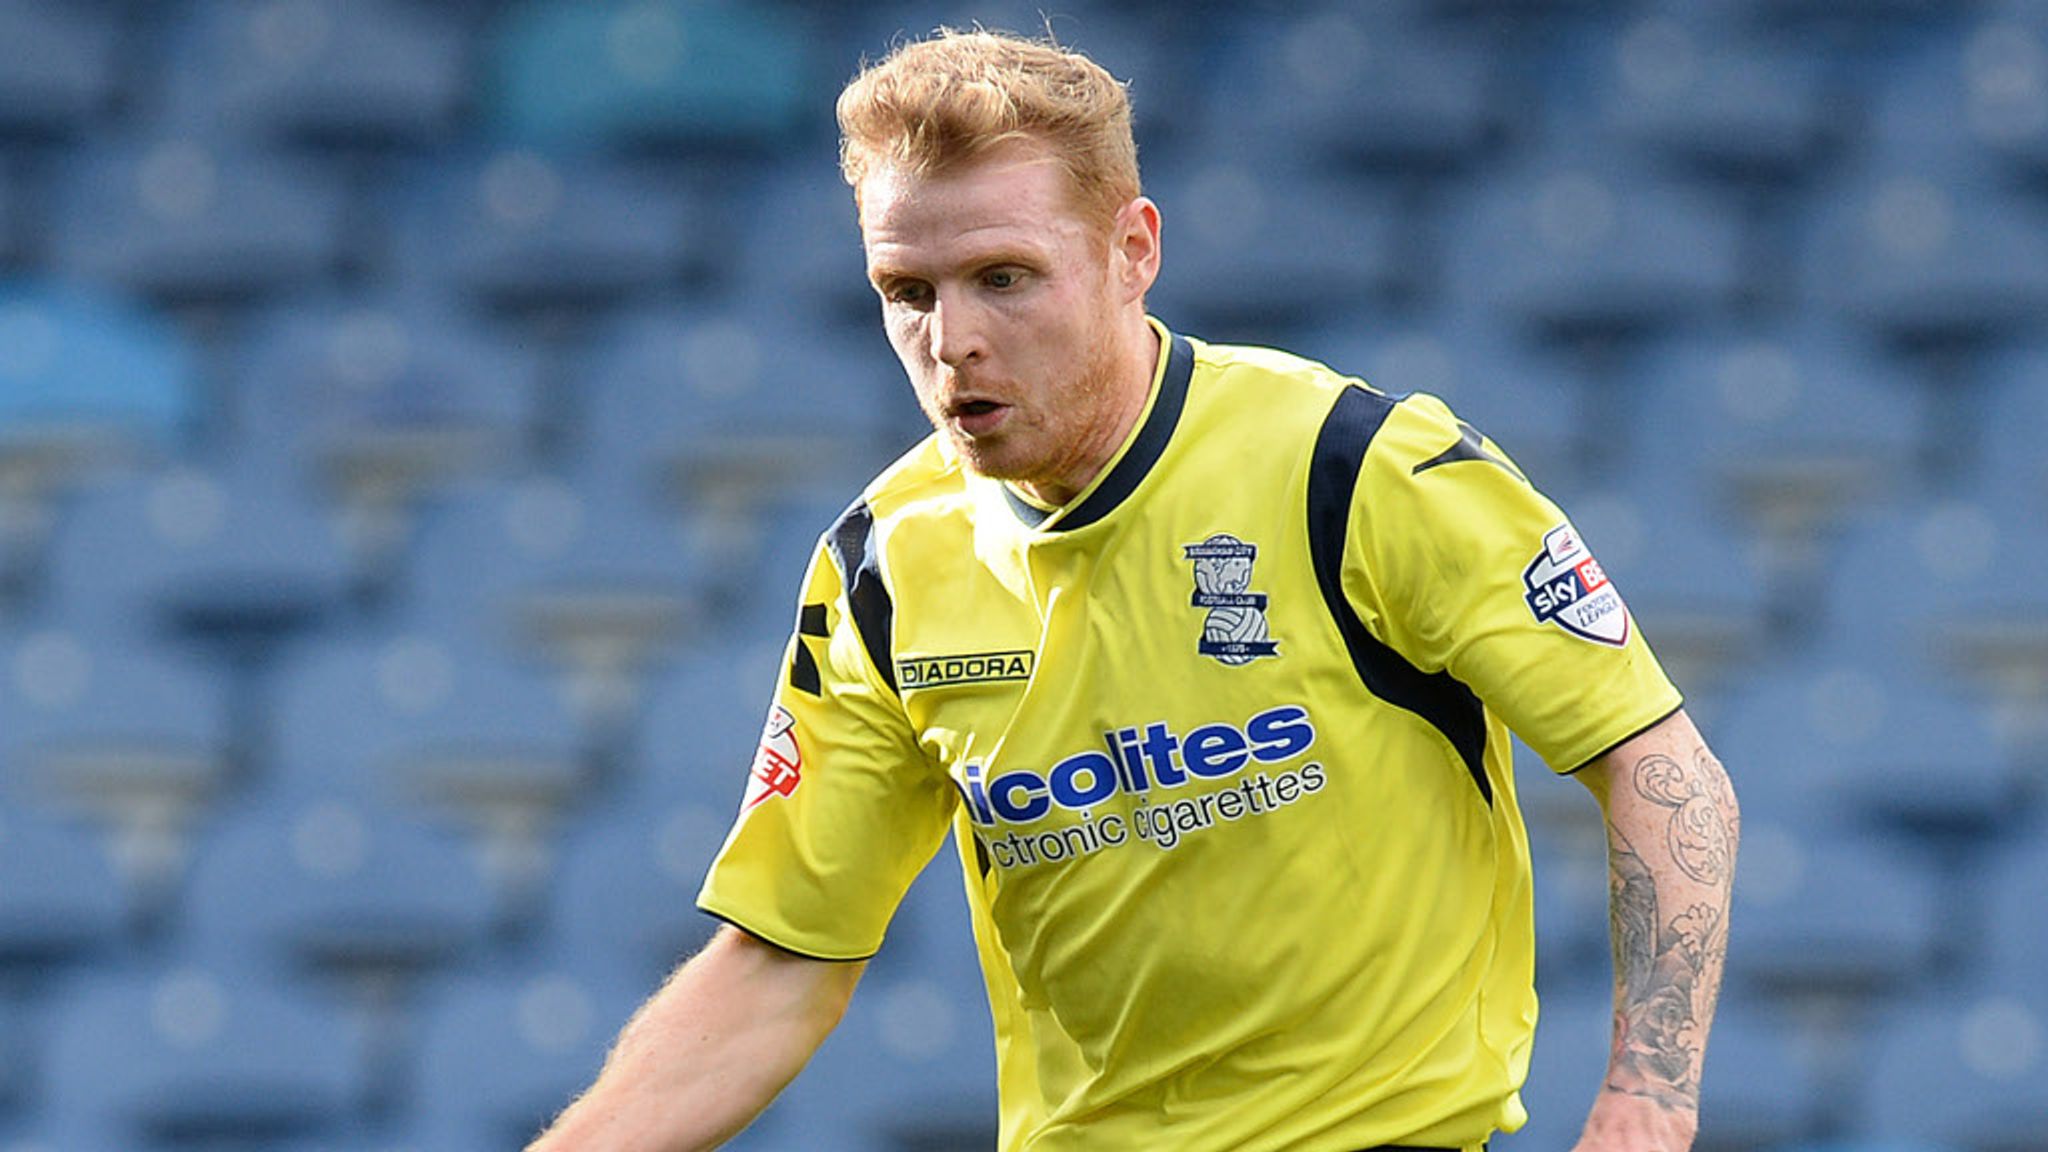 Chris Burke heads to Rotherham on loan from Nottingham Forest